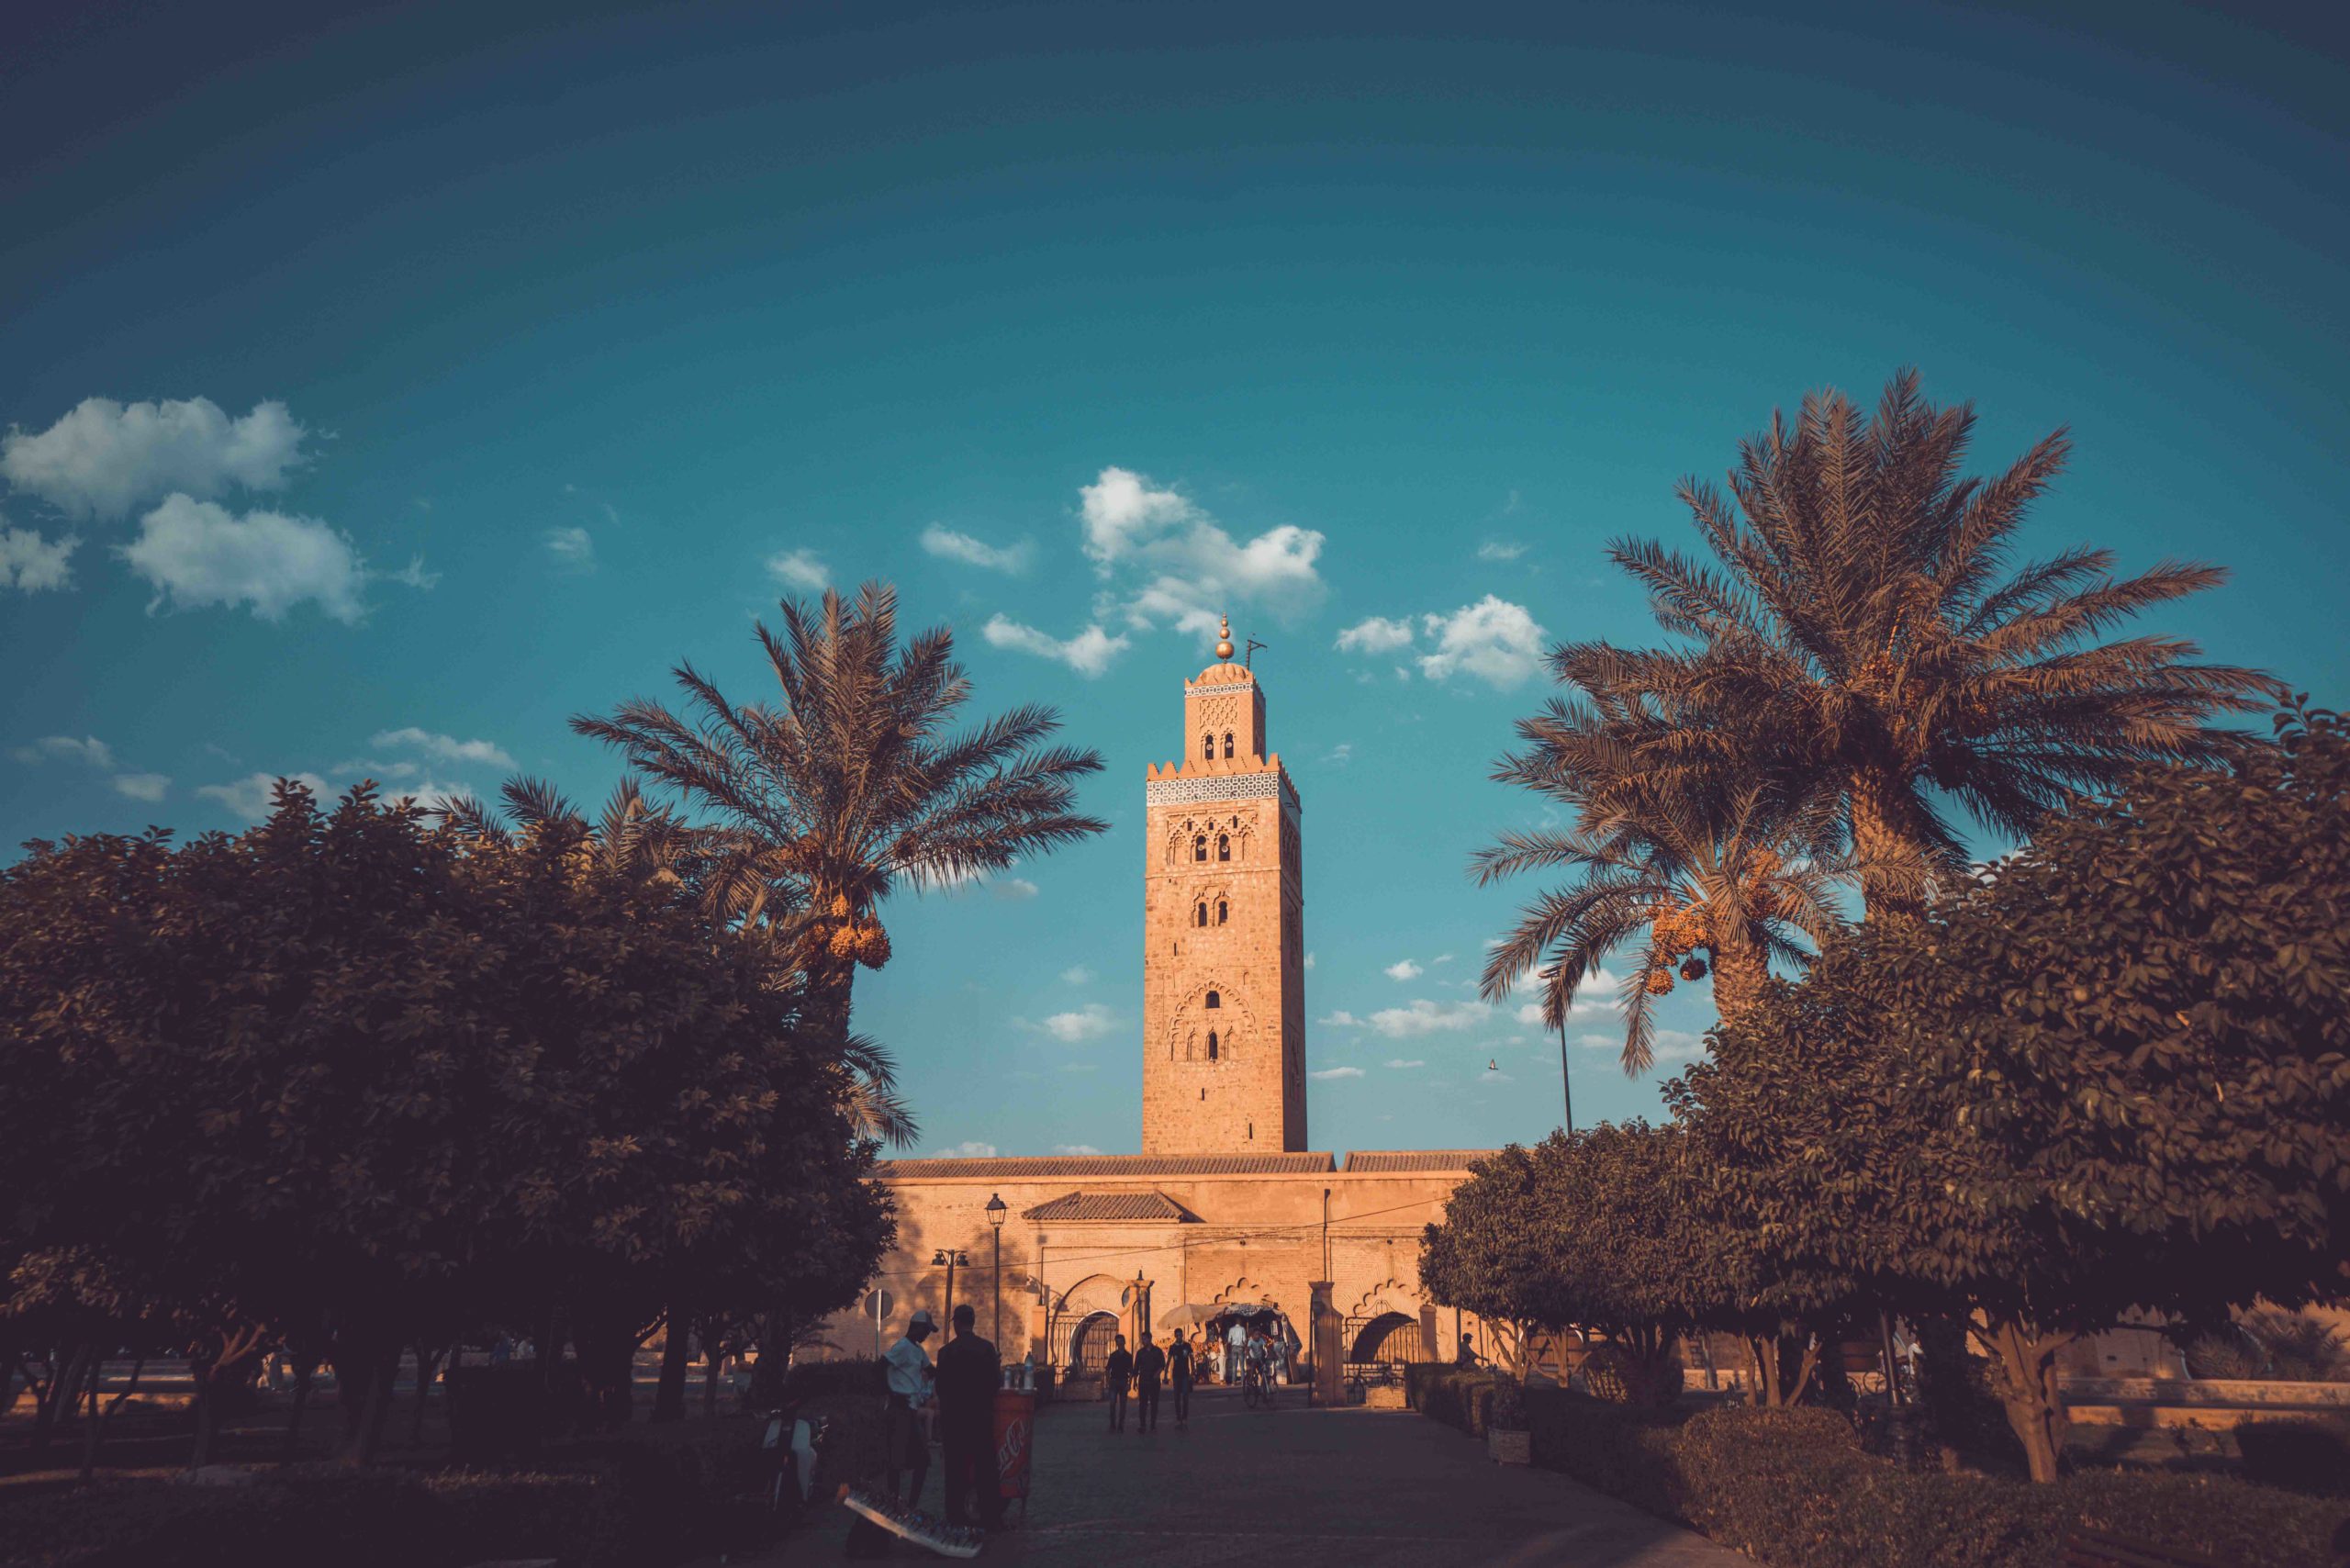 Discover The Magic of Morocco